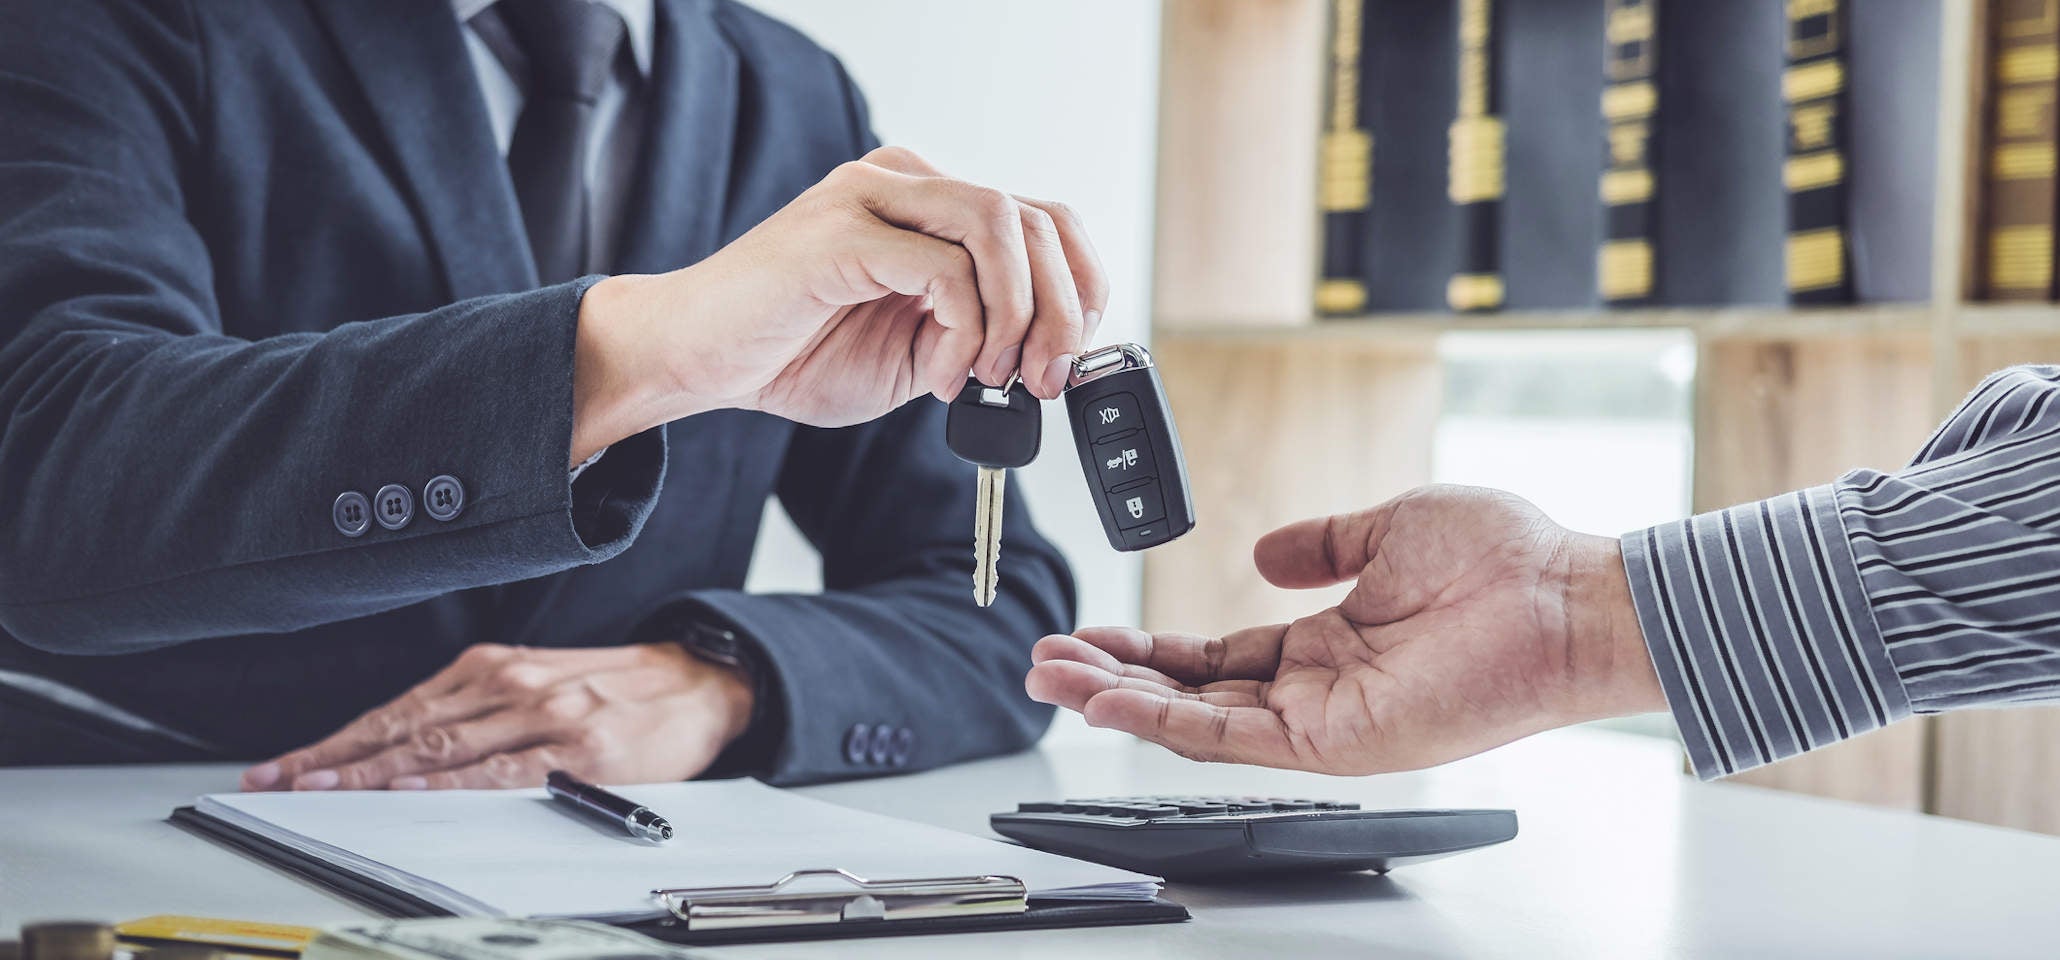 image of image of a man handing over keys